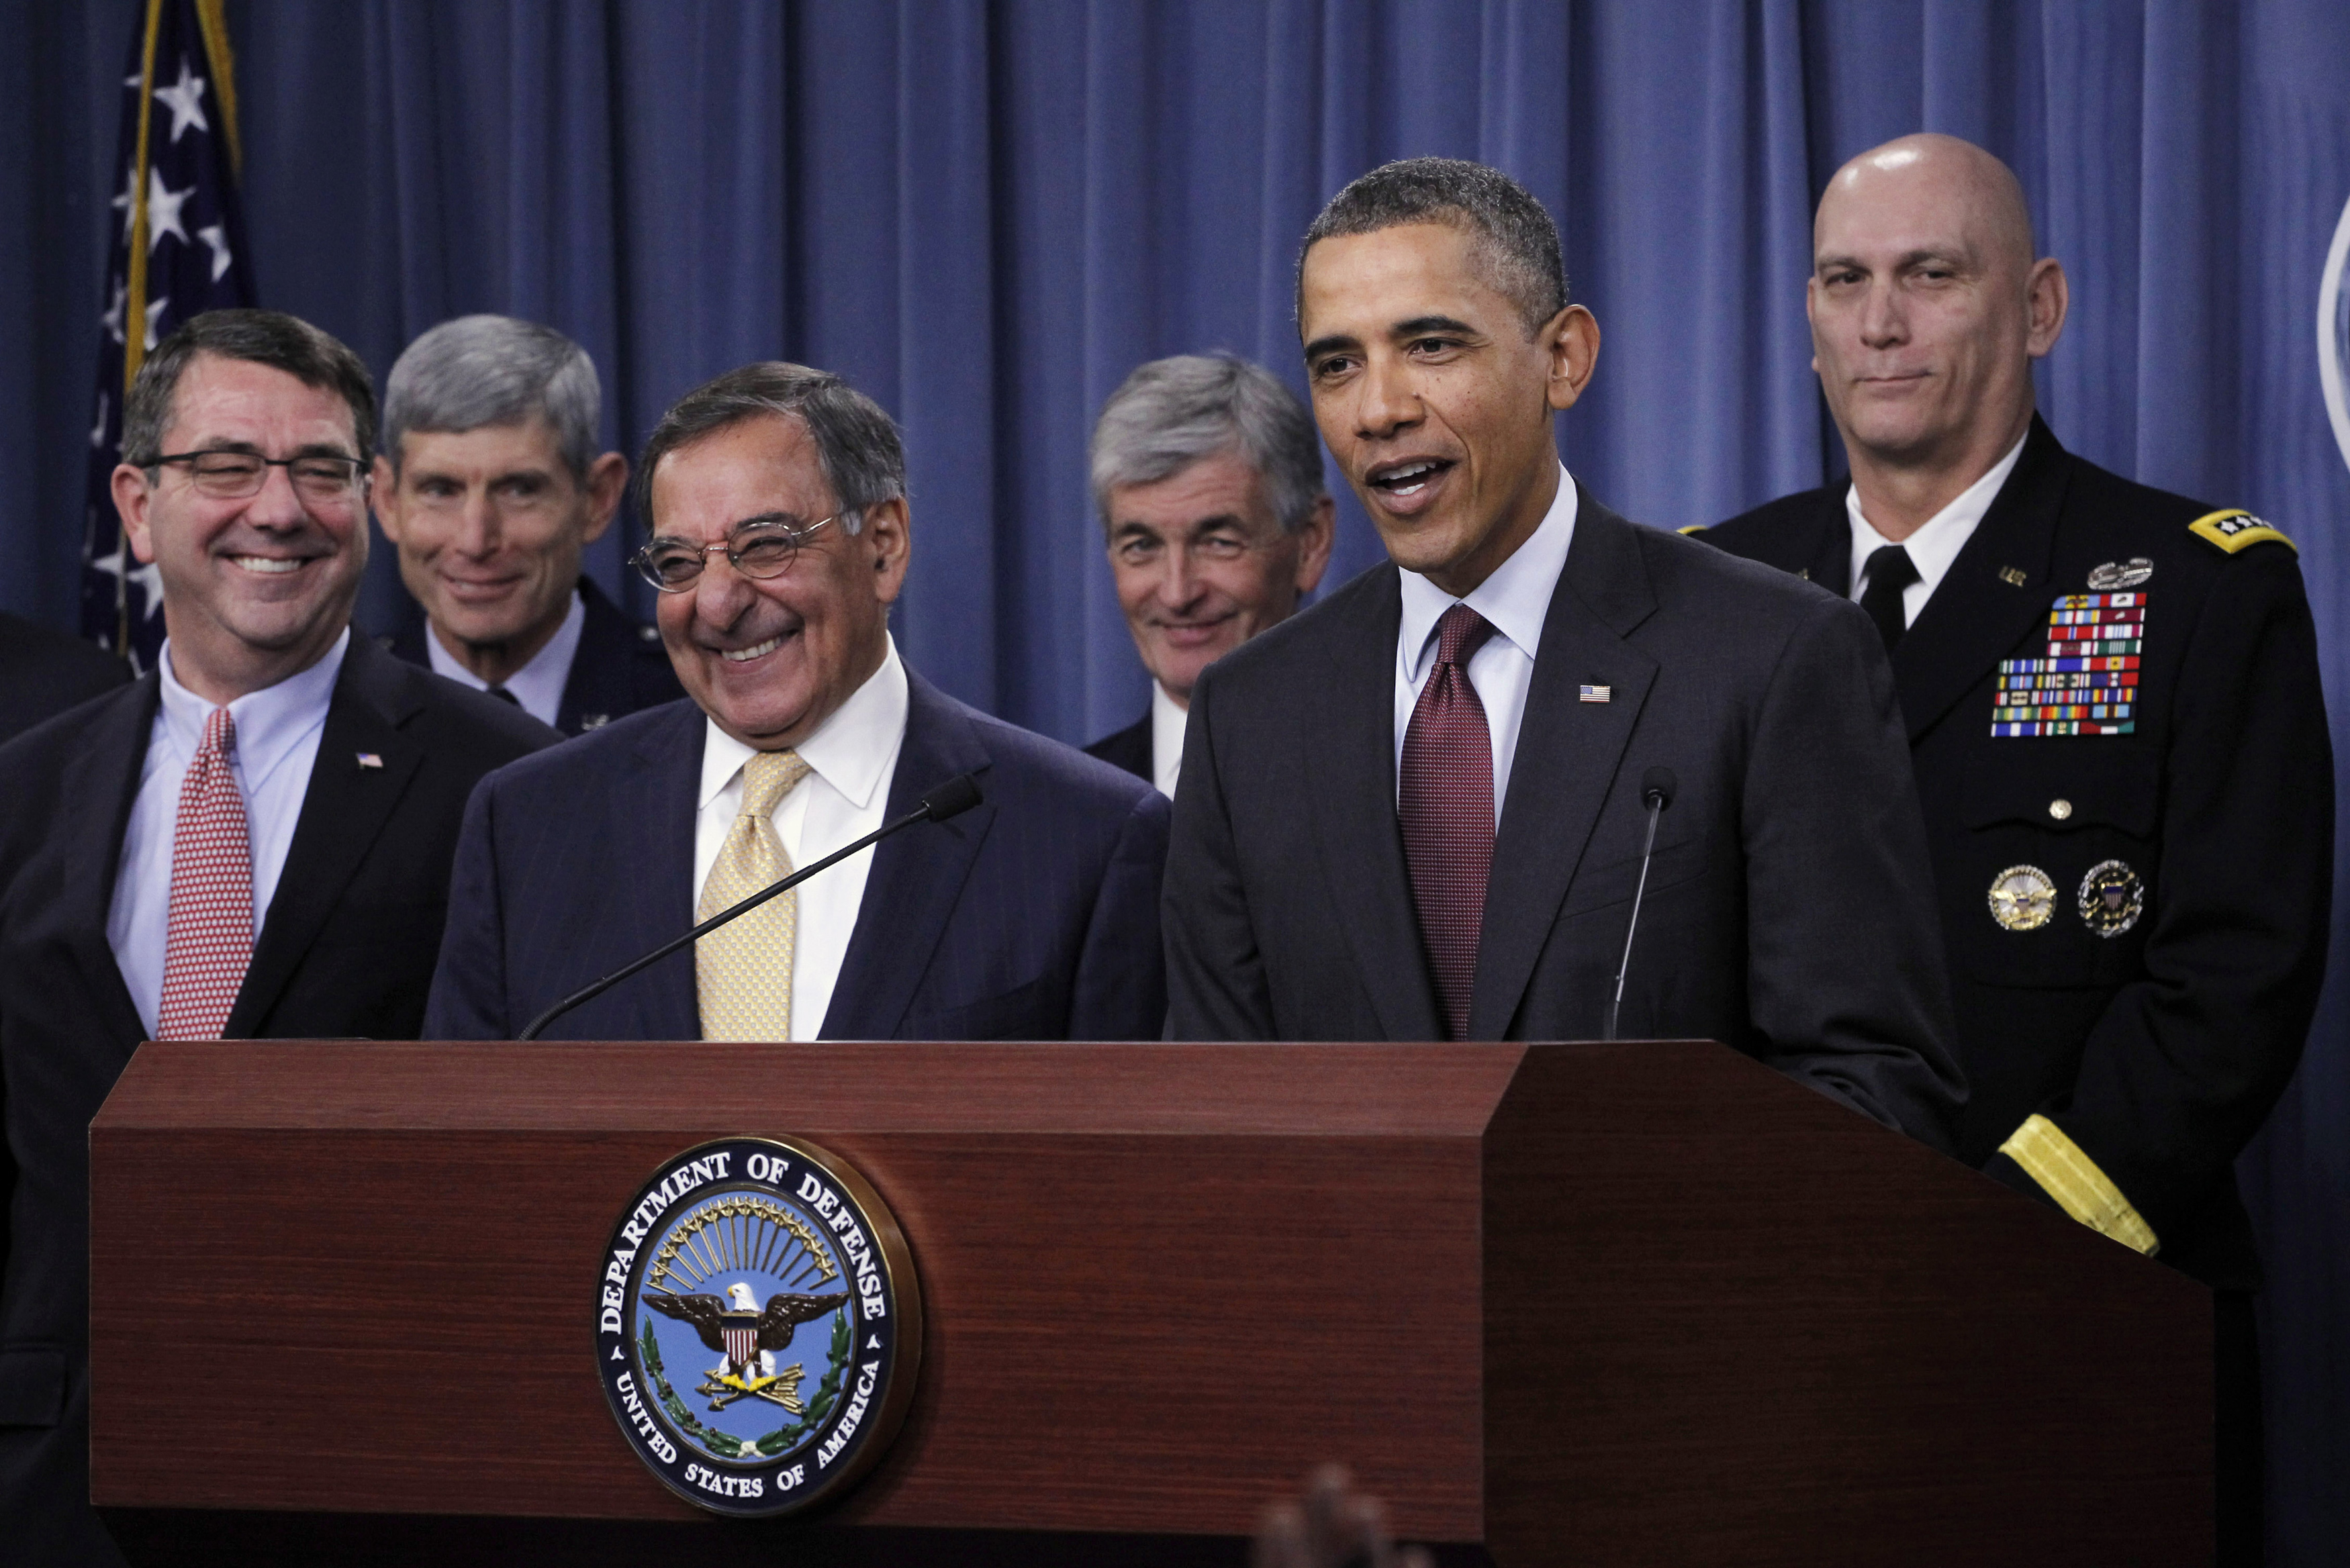 U.S. President Barack Obama delivers remarks on the Defense Strategic Review at the Pentagon near Washington, January 5, 2012.  With Obama are (front row, L-R) Deputy Secretary of Defense Ashton Carter and Secretary of Defense Leon Panetta, (back row L-R)  Air Force Chief of Staff General Norton Schwartz, Secretary of the Army John McHugh, Chief of Staff of the Army General Raymond Odierno, Commandant of the Marine Corps General James Amos, Secretary of the Navy Ray Mabus, Chief of Naval Operations Admiral Jonathan Greenert and Chief of National Guard Bureau General Craig McKinley.   REUTERS/Jason Reed   (UNITED STATES - Tags: POLITICS MILITARY)